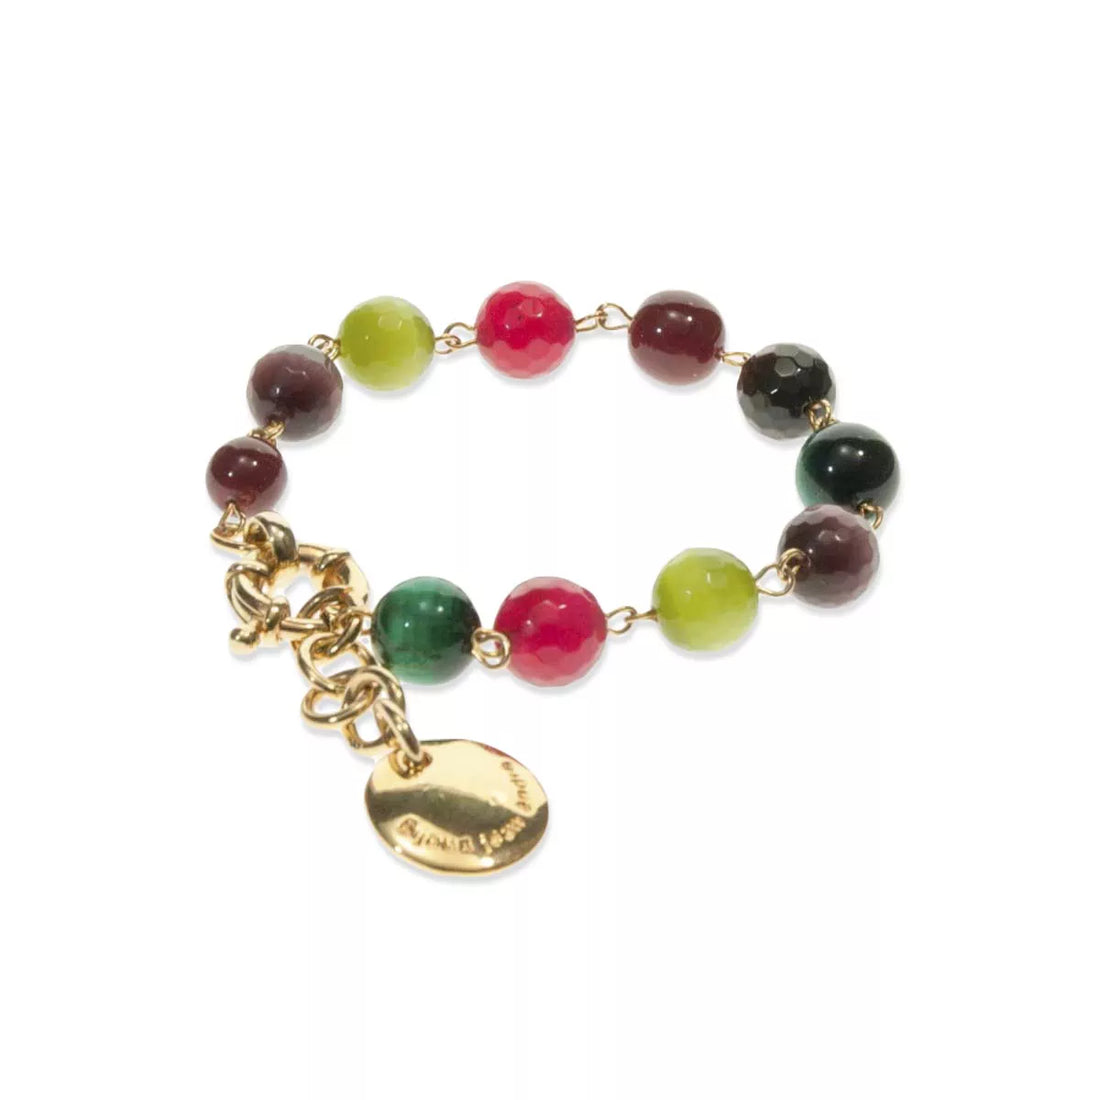 Bracelet of semiprecious stones and crystals